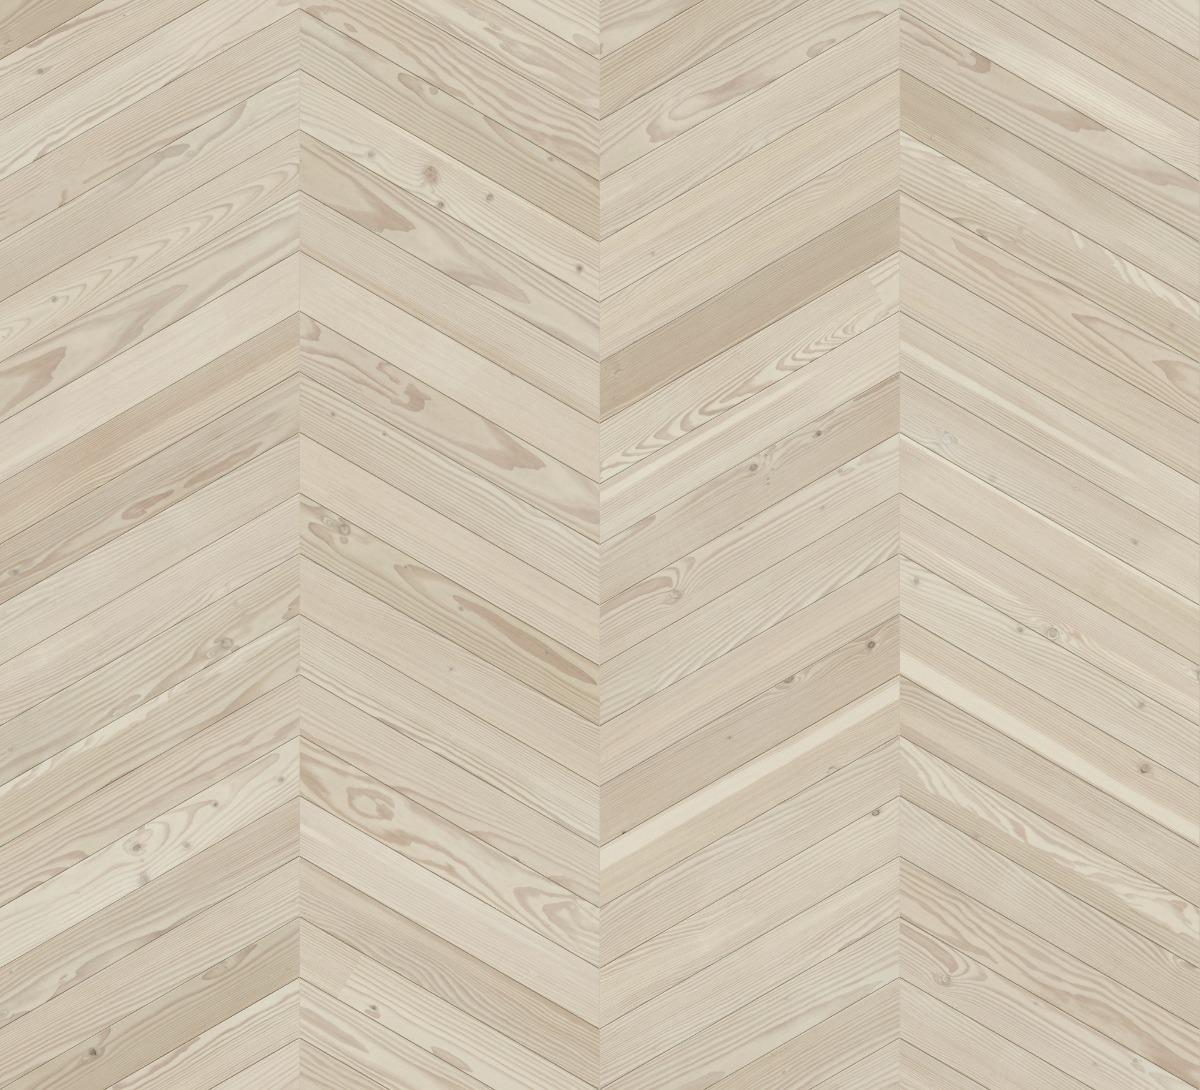 A seamless wood texture with douglas fir boards arranged in a Chevron pattern